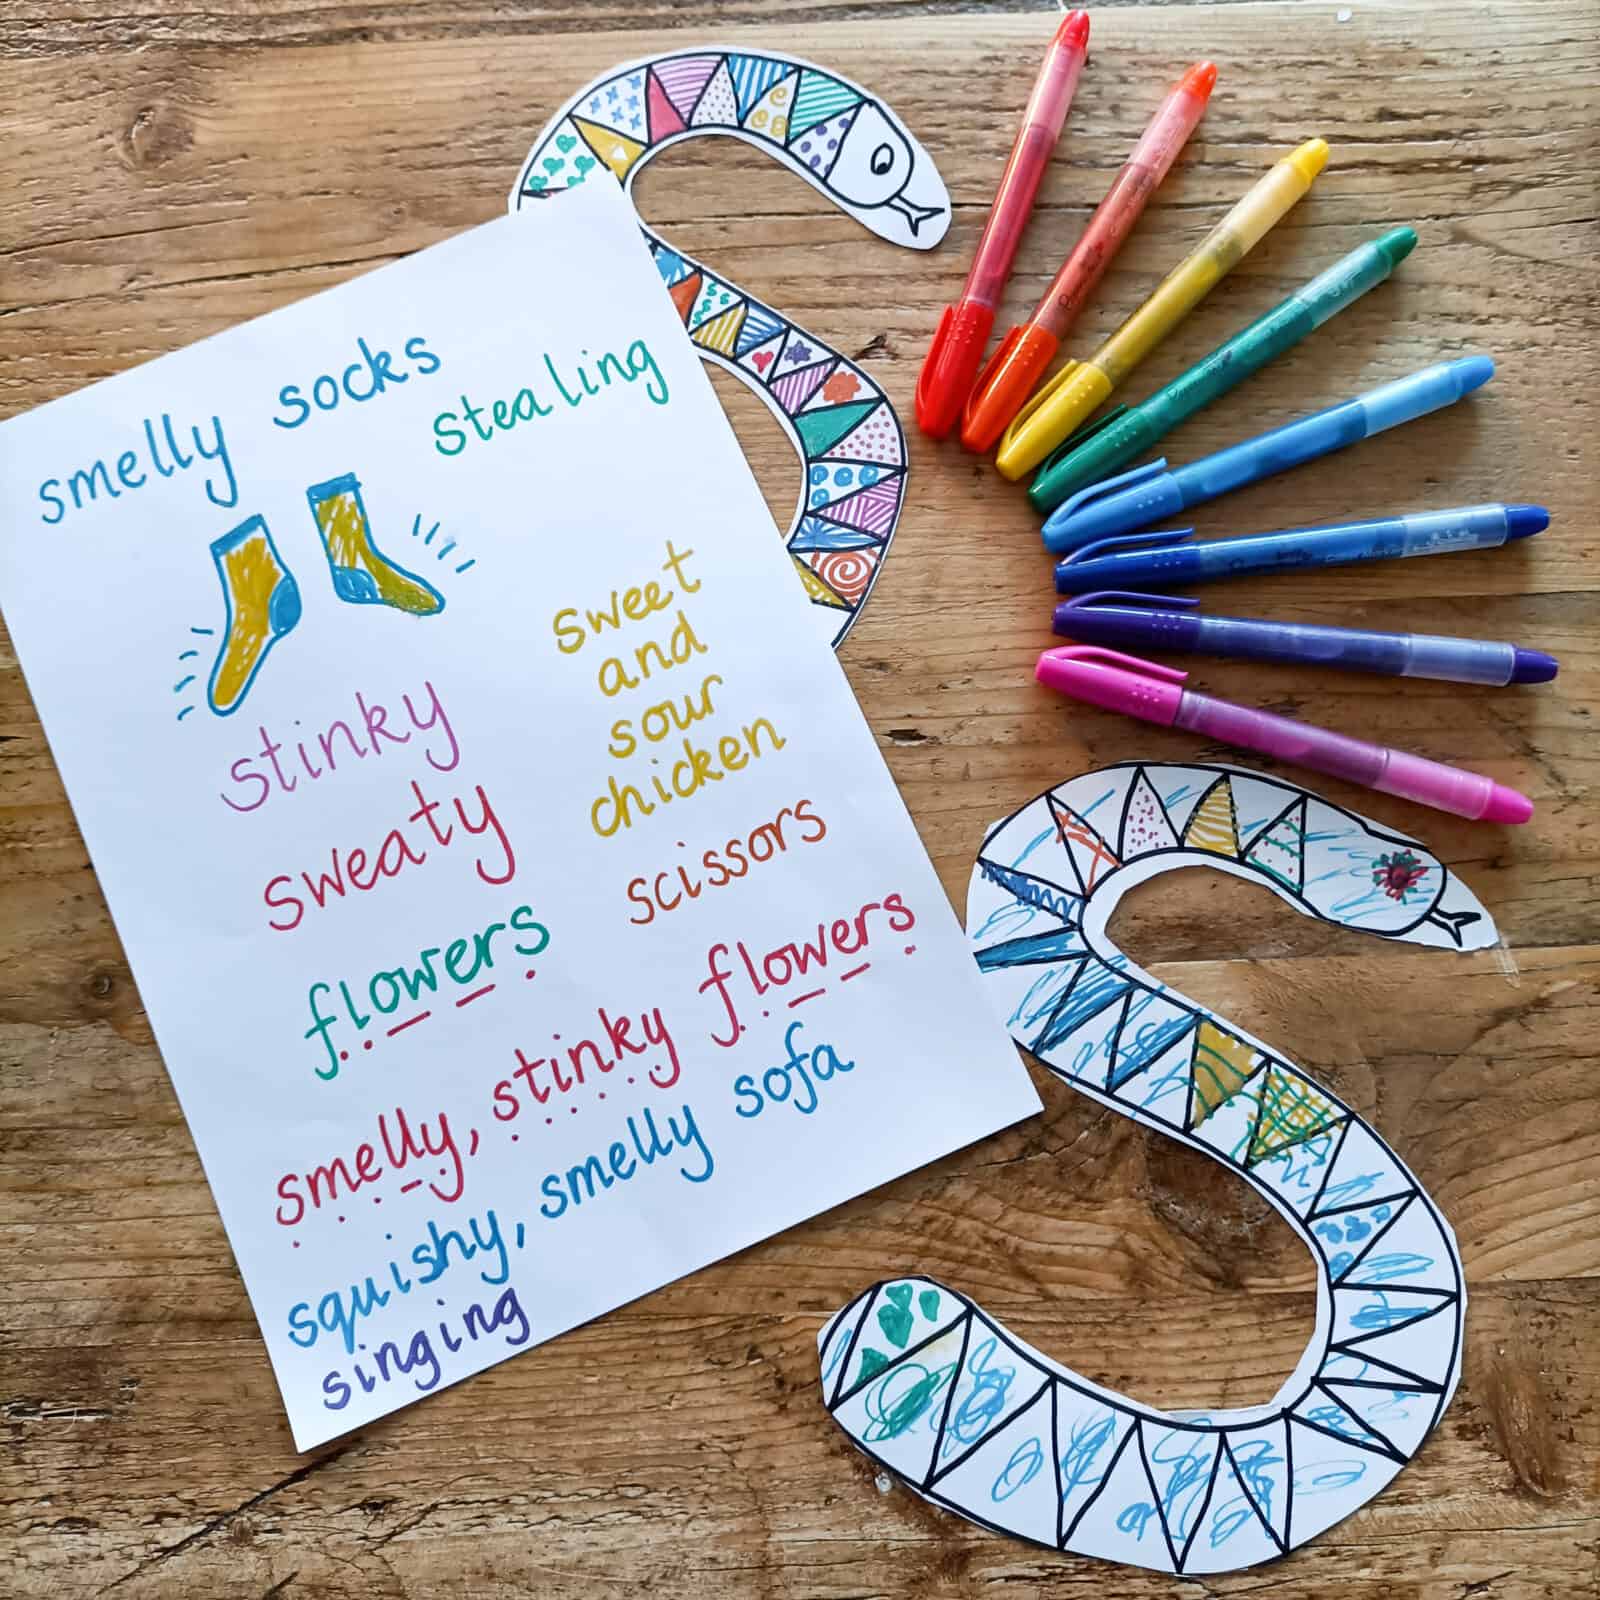 Pinterest Pin for learning Phonics Pahse 2 's' with 's' words, glitter pens and 's' snakes decorated from paper